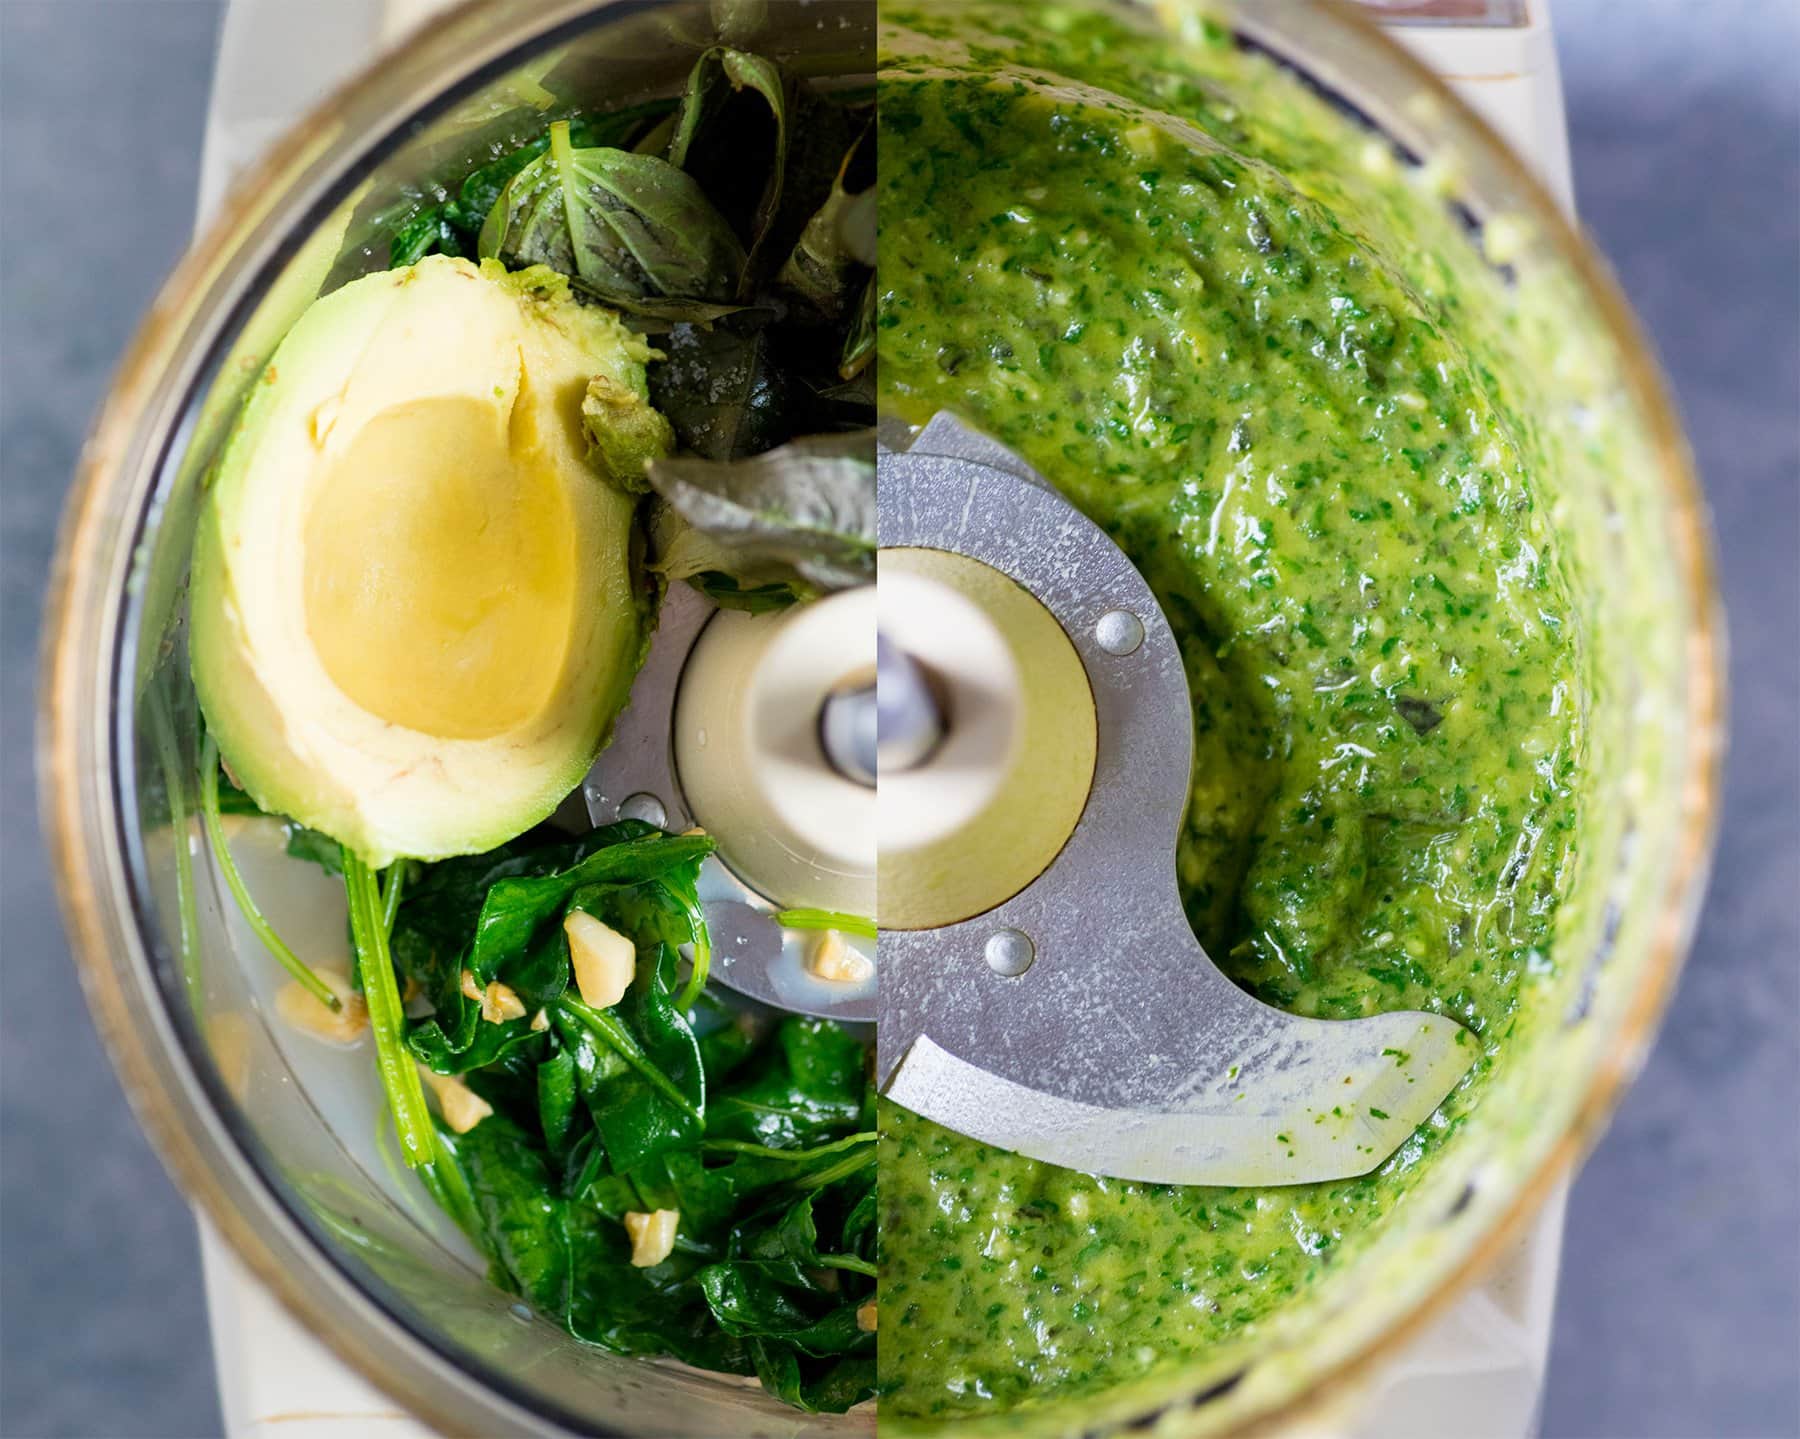 Overhead split-shot of ingredients for pesto in a food processor, with ingredients on the left and the blended pesto on the right